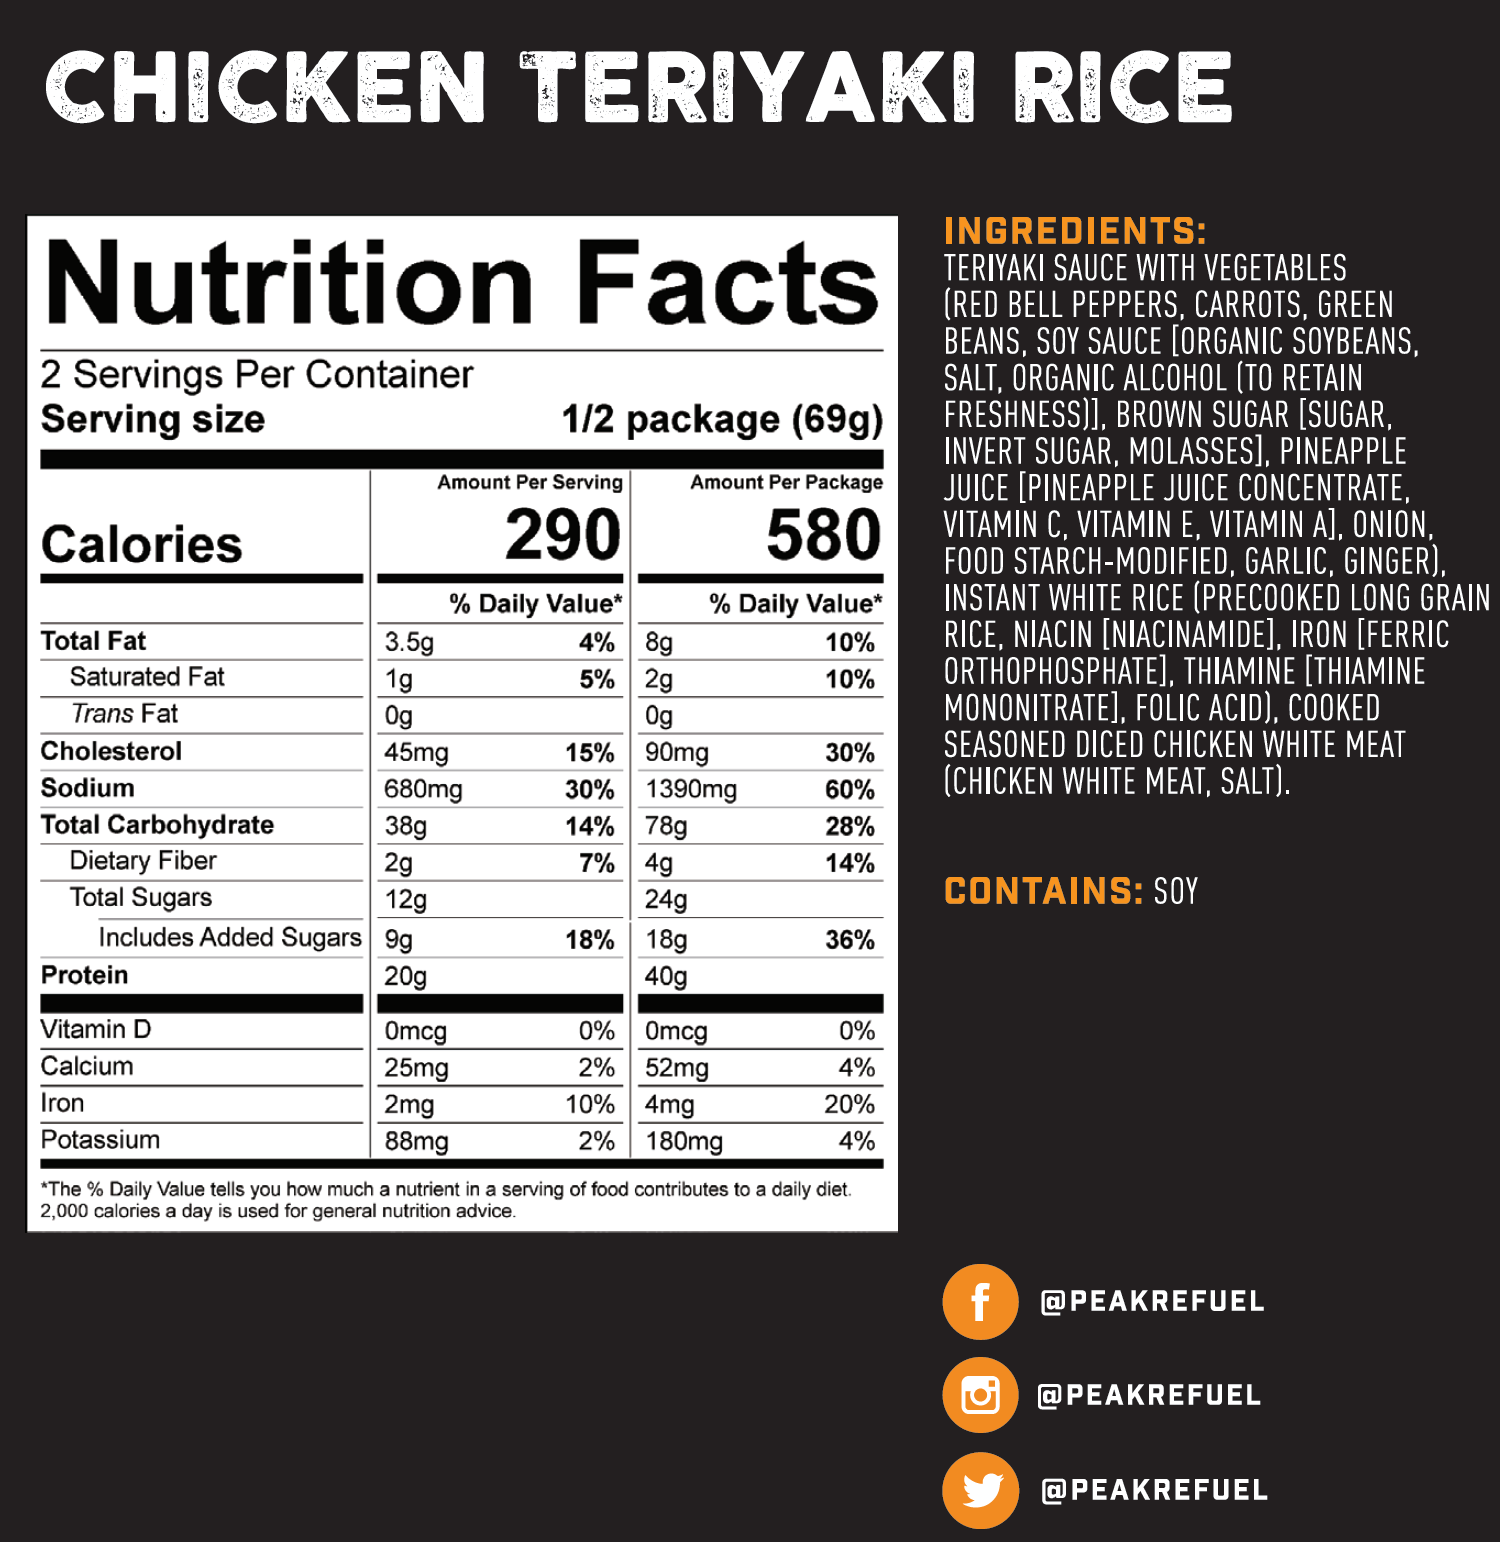 A nutrition facts label with black text and a logo of a camera on a black background.